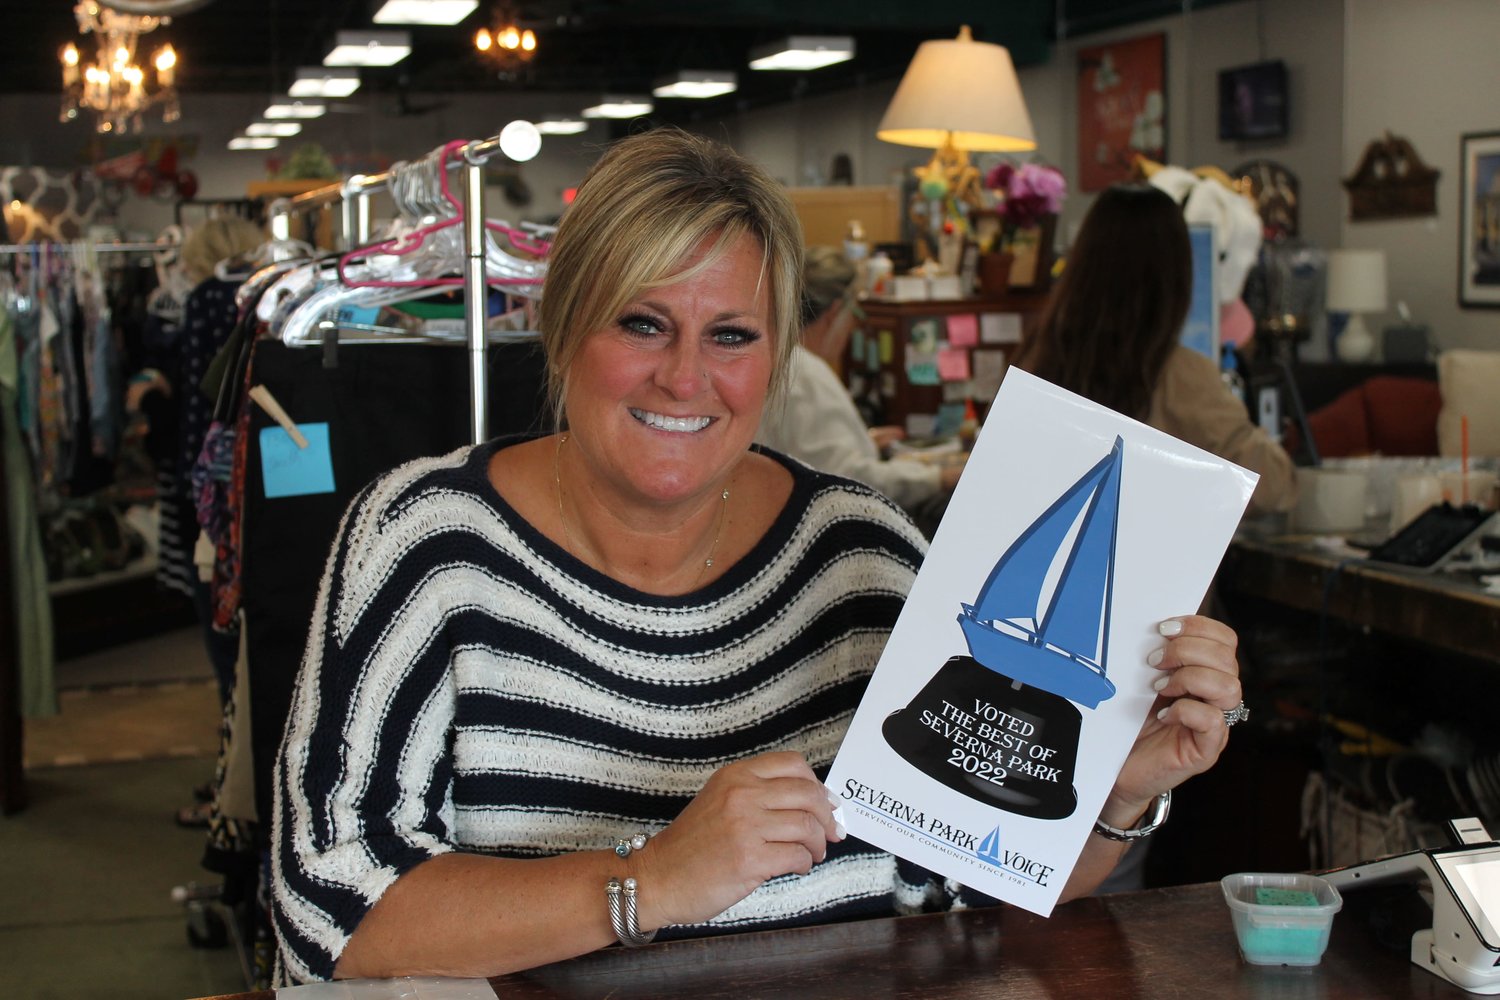 Stacey Cassidy, owner of Savvy Consignment, received her decal for Best Consignment Shop.